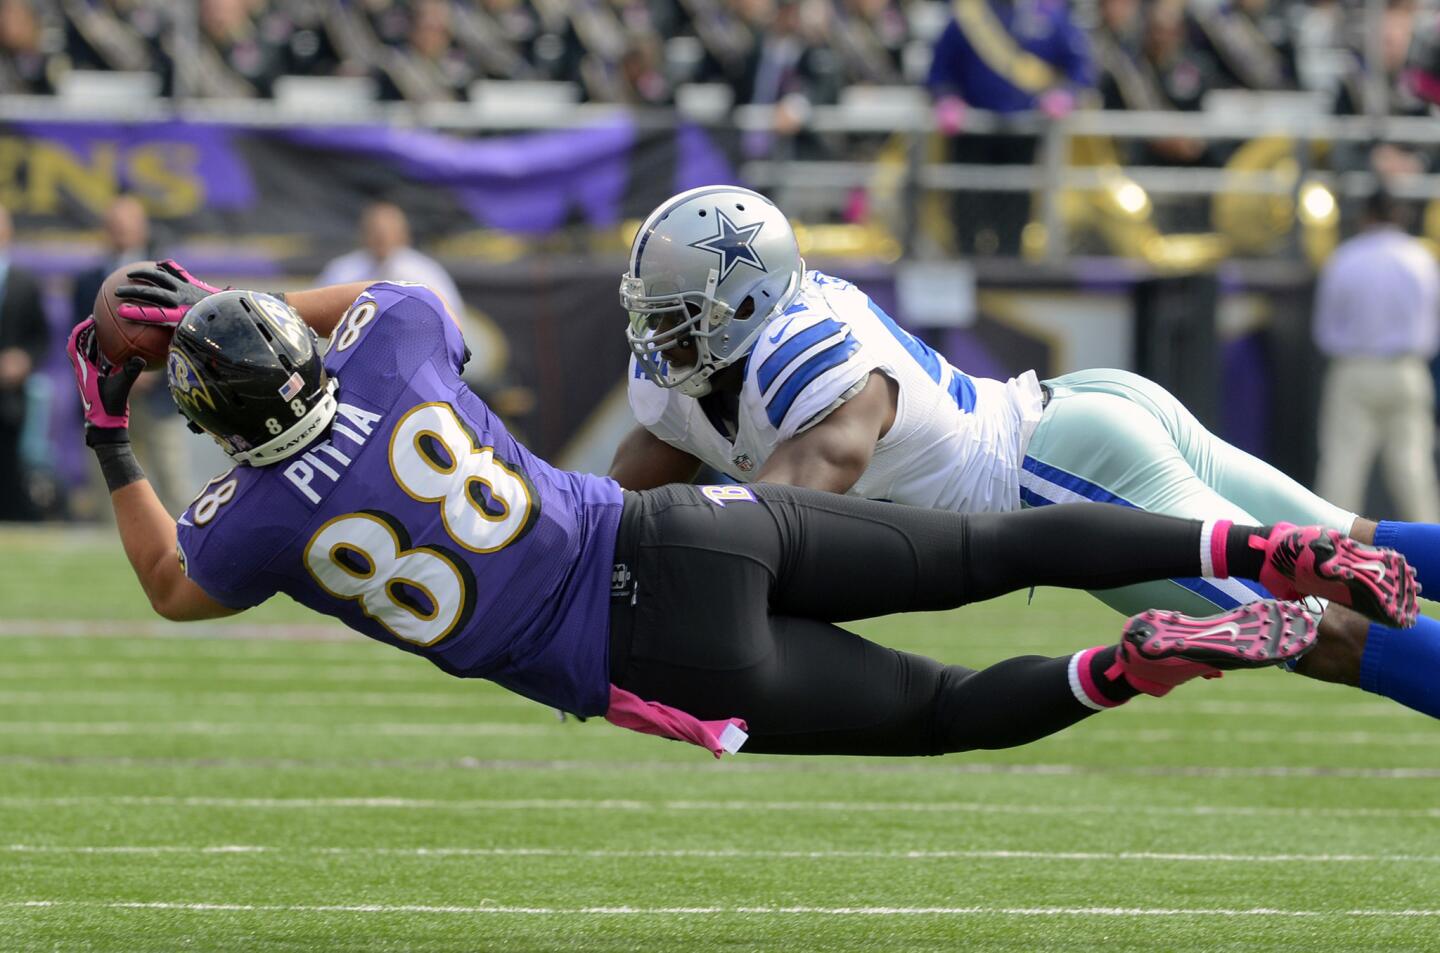 Tight end Dennis Pitta dove, twisted his body and stretched out his arms and hands for an acrobatic sideline catch against the Dallas Cowboys. Honorable mention: Anquan Boldin's back-of-the-end zone grab where he tapped his feet inbounds for a 34-yard touchdown against the Cincinnati Bengals.